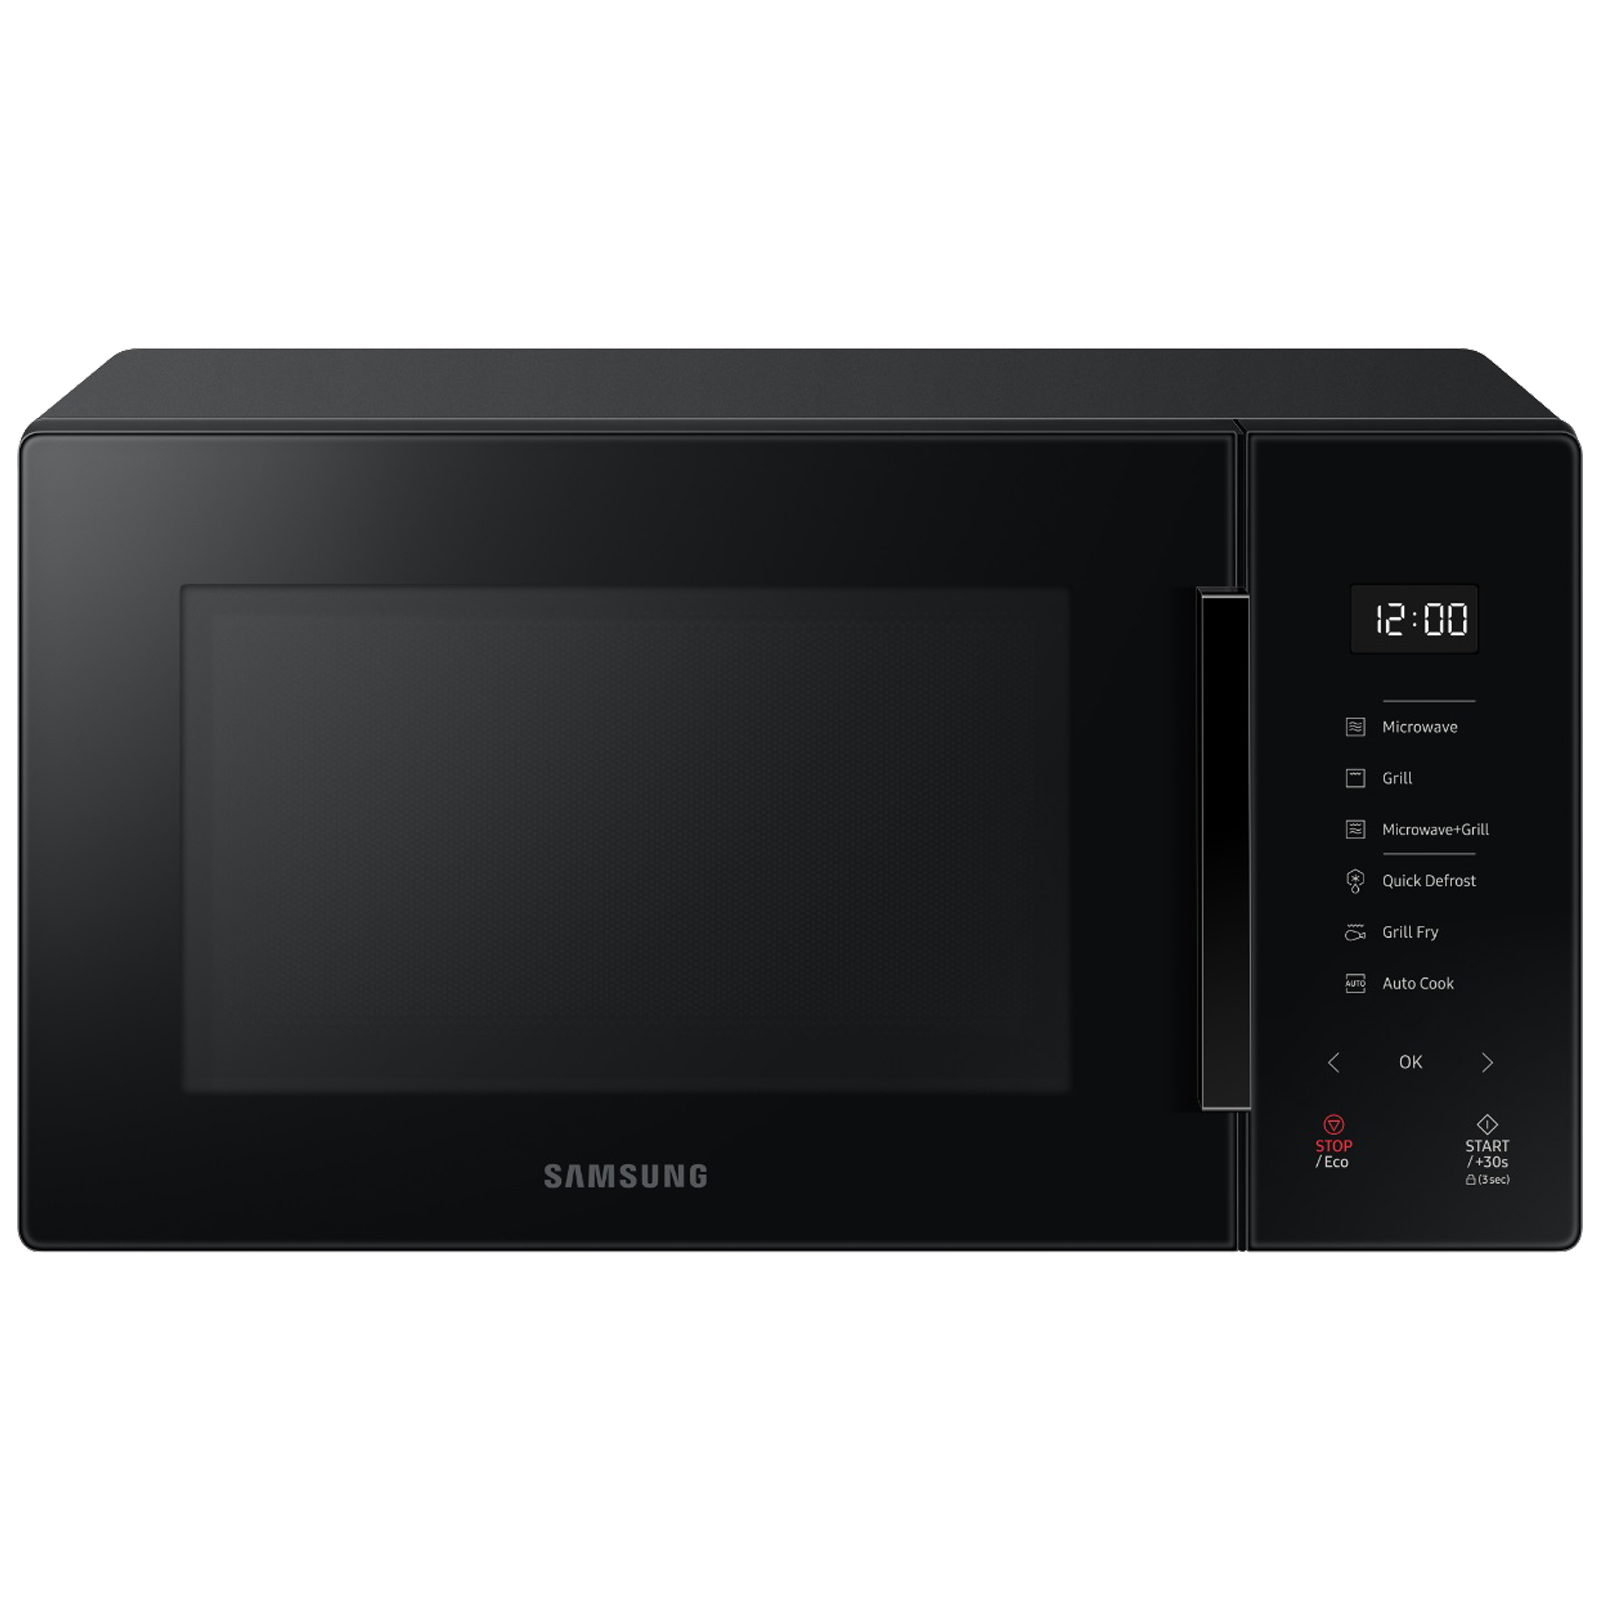 Samsung Baker 23 Litres Grill Microwave Oven (Auto Cook, MG23T5012CK/TL, Pure Black)_1